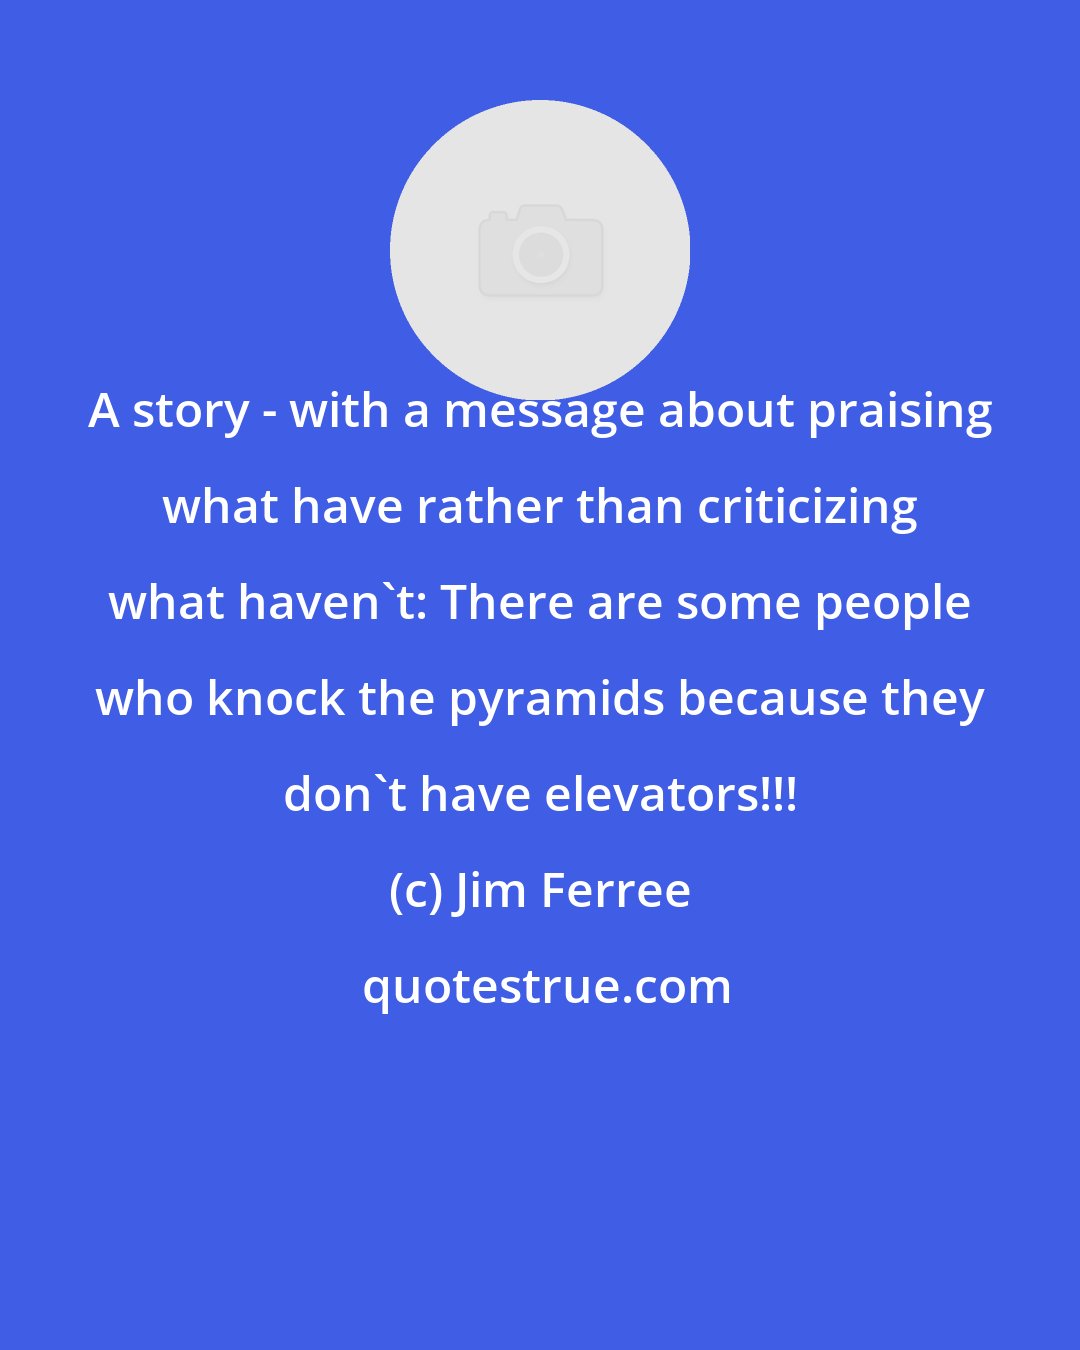 Jim Ferree: A story - with a message about praising what have rather than criticizing what haven't: There are some people who knock the pyramids because they don't have elevators!!!